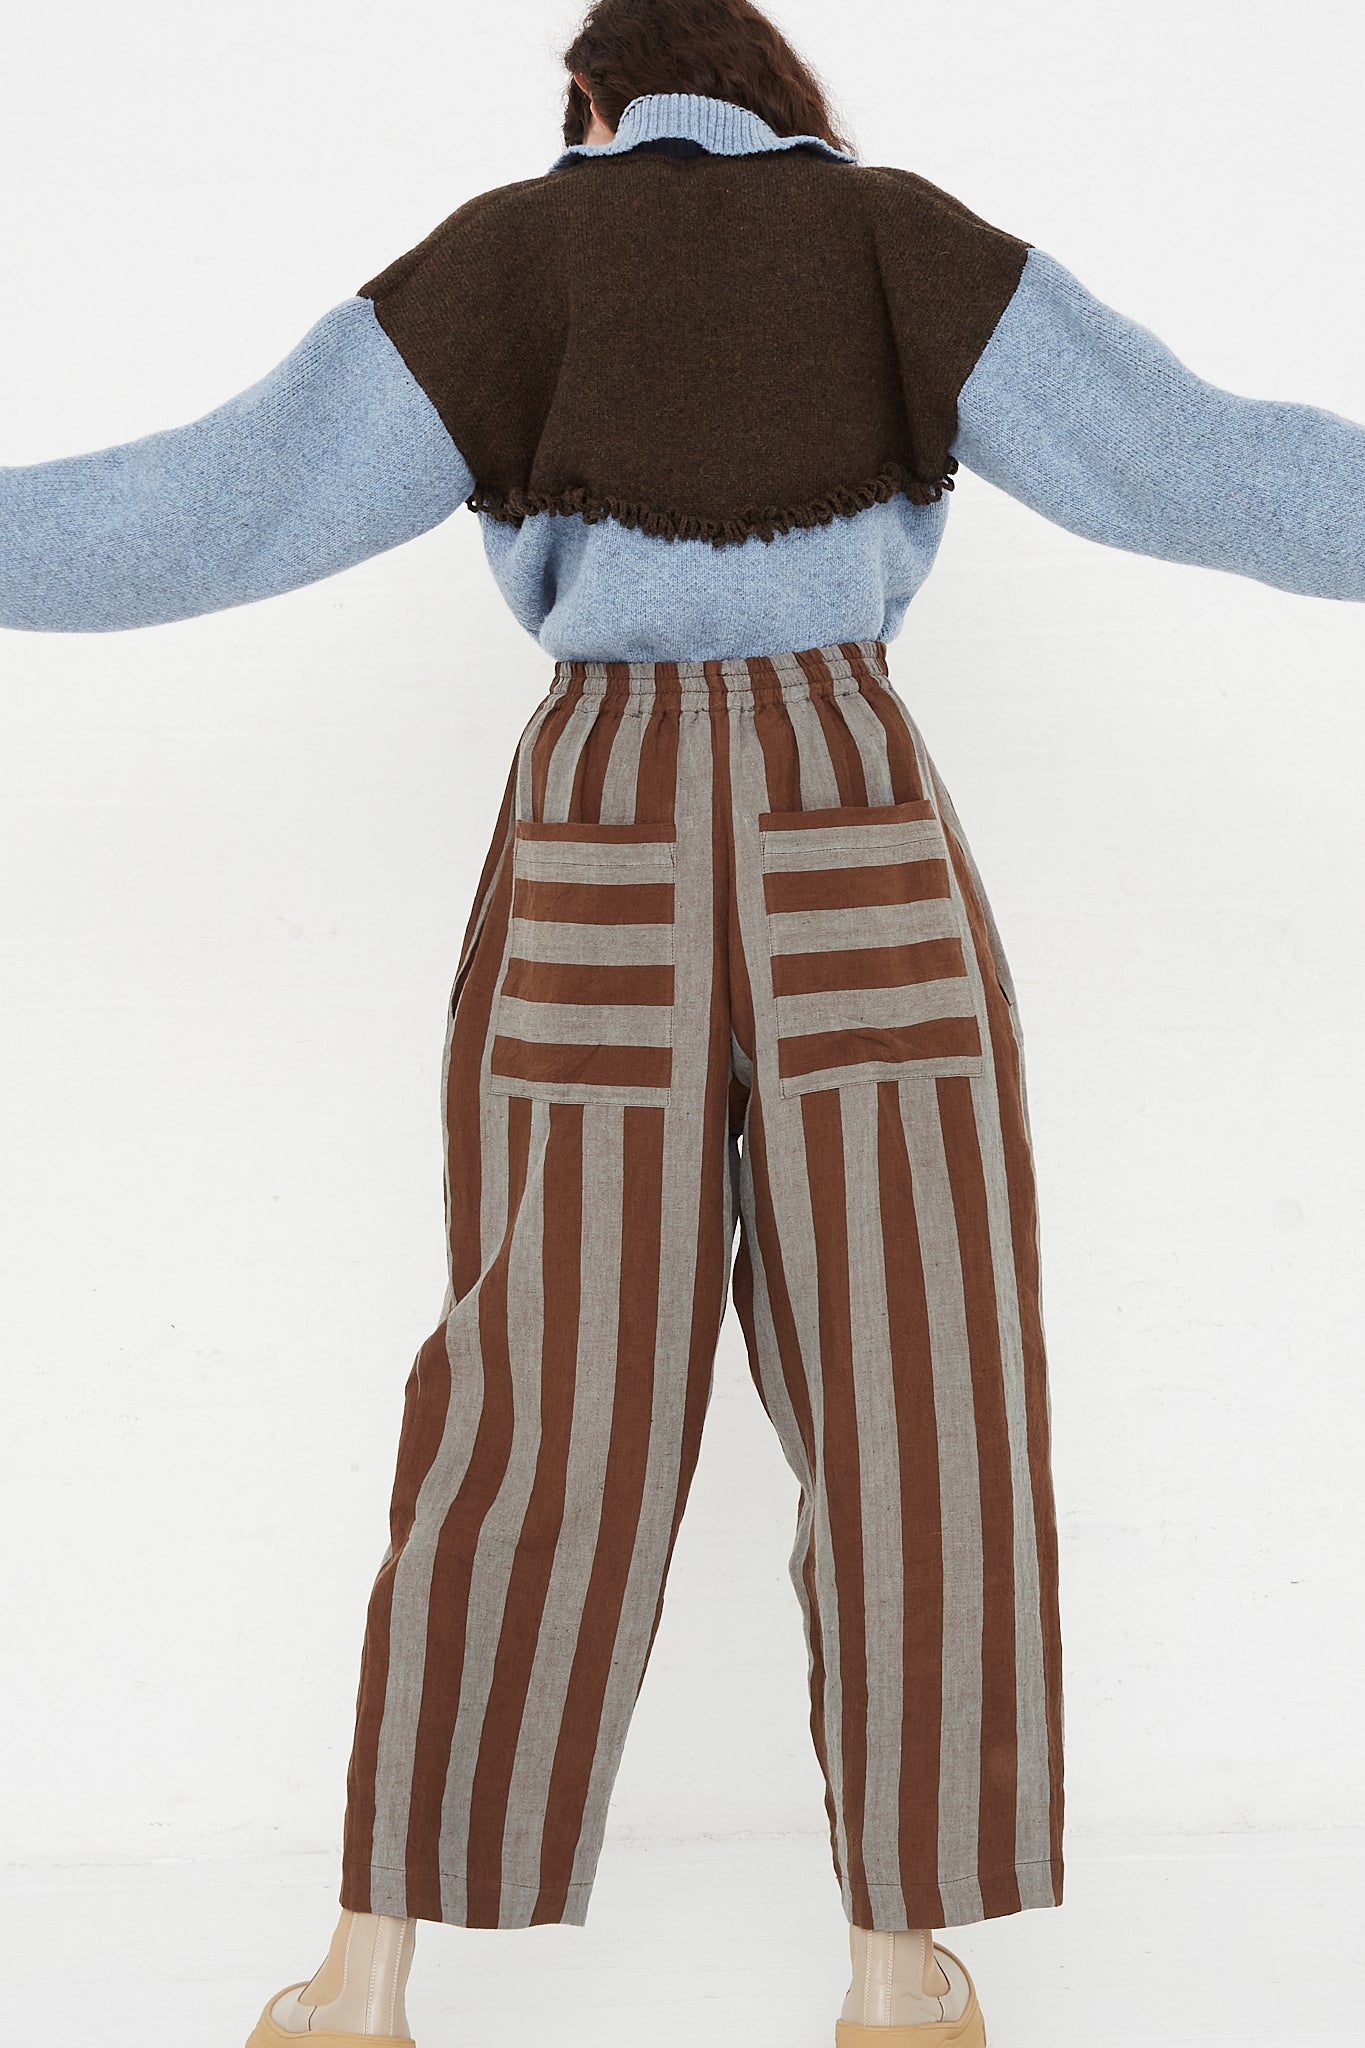 A model wearing a high waist trouser in a striped Irish linen. Brown and blue stripe. Features an elasticated waist and a wide straight leg. Full length and back view of model highlight full pant, sweater and boots. Showing both pocket placements and details. Pockets feature horizontal stripe in contrast to vertical pant stripe. Designed by Cawley - Oroboro Store